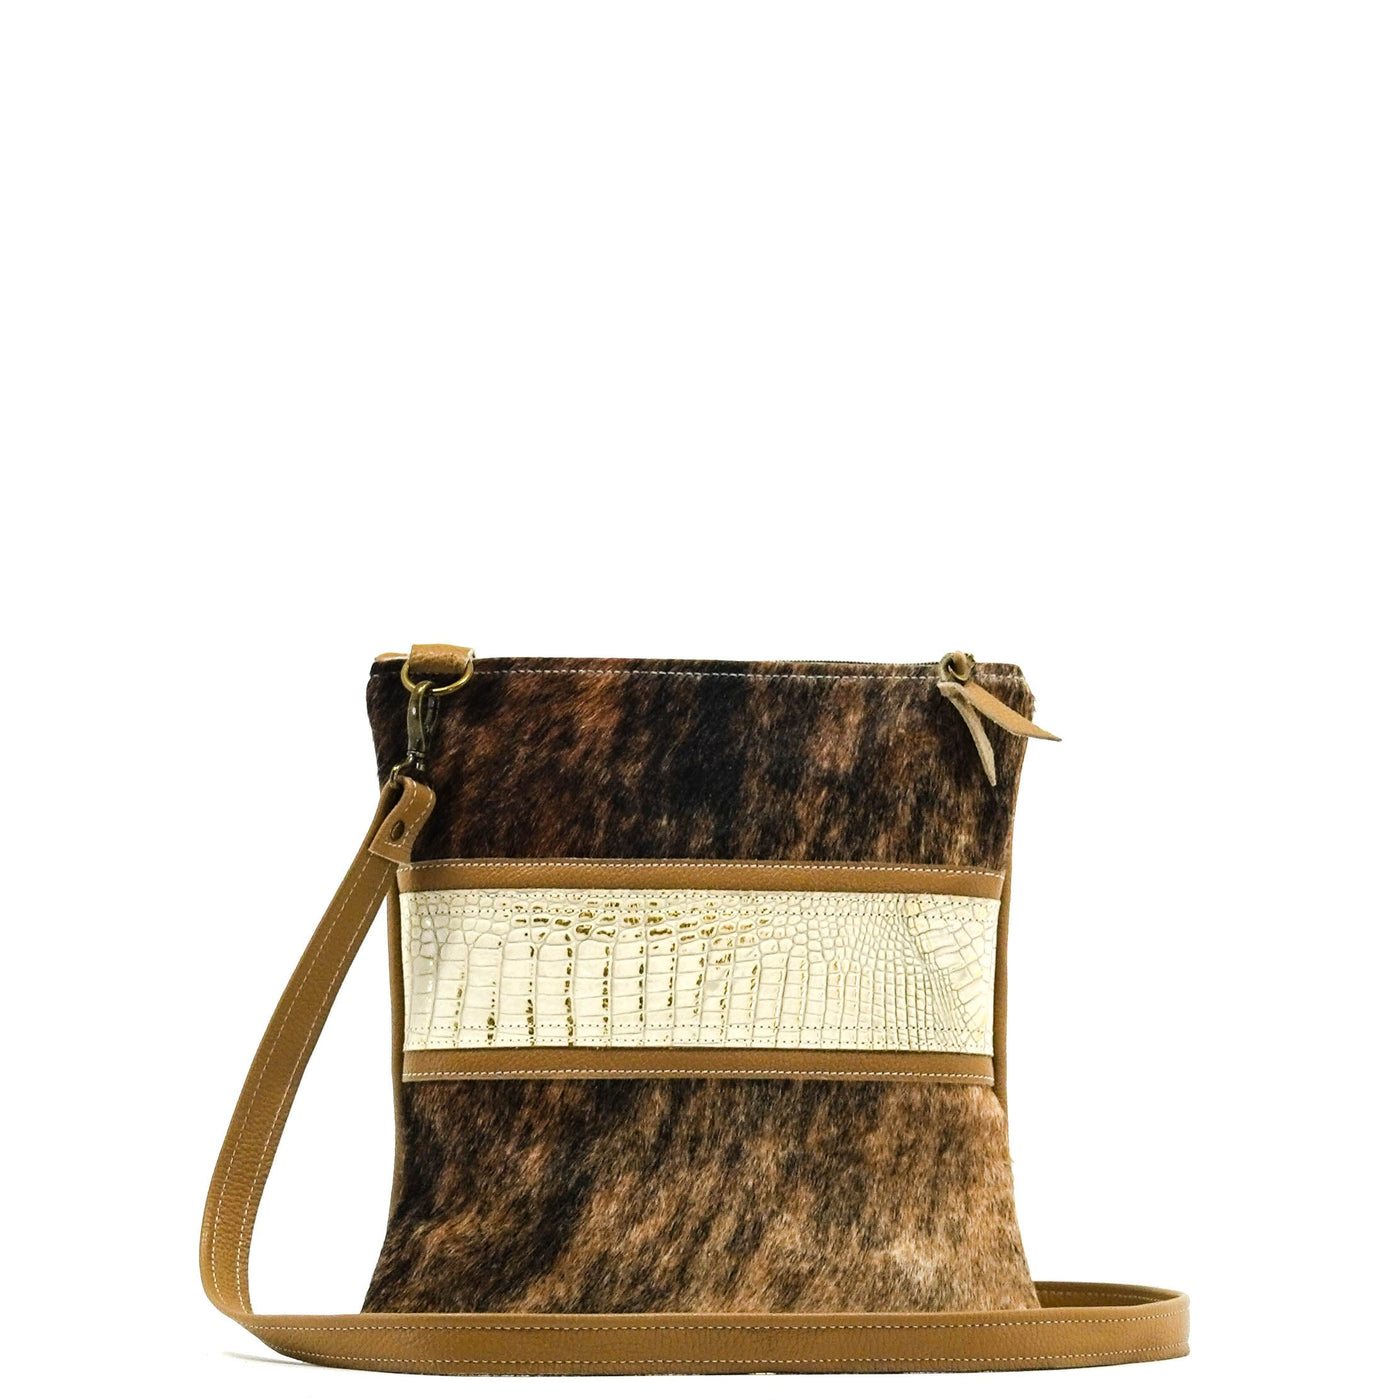 Shania - Two-Tone Brindle w/ Ivory Croc-Shania-Western-Cowhide-Bags-Handmade-Products-Gifts-Dancing Cactus Designs